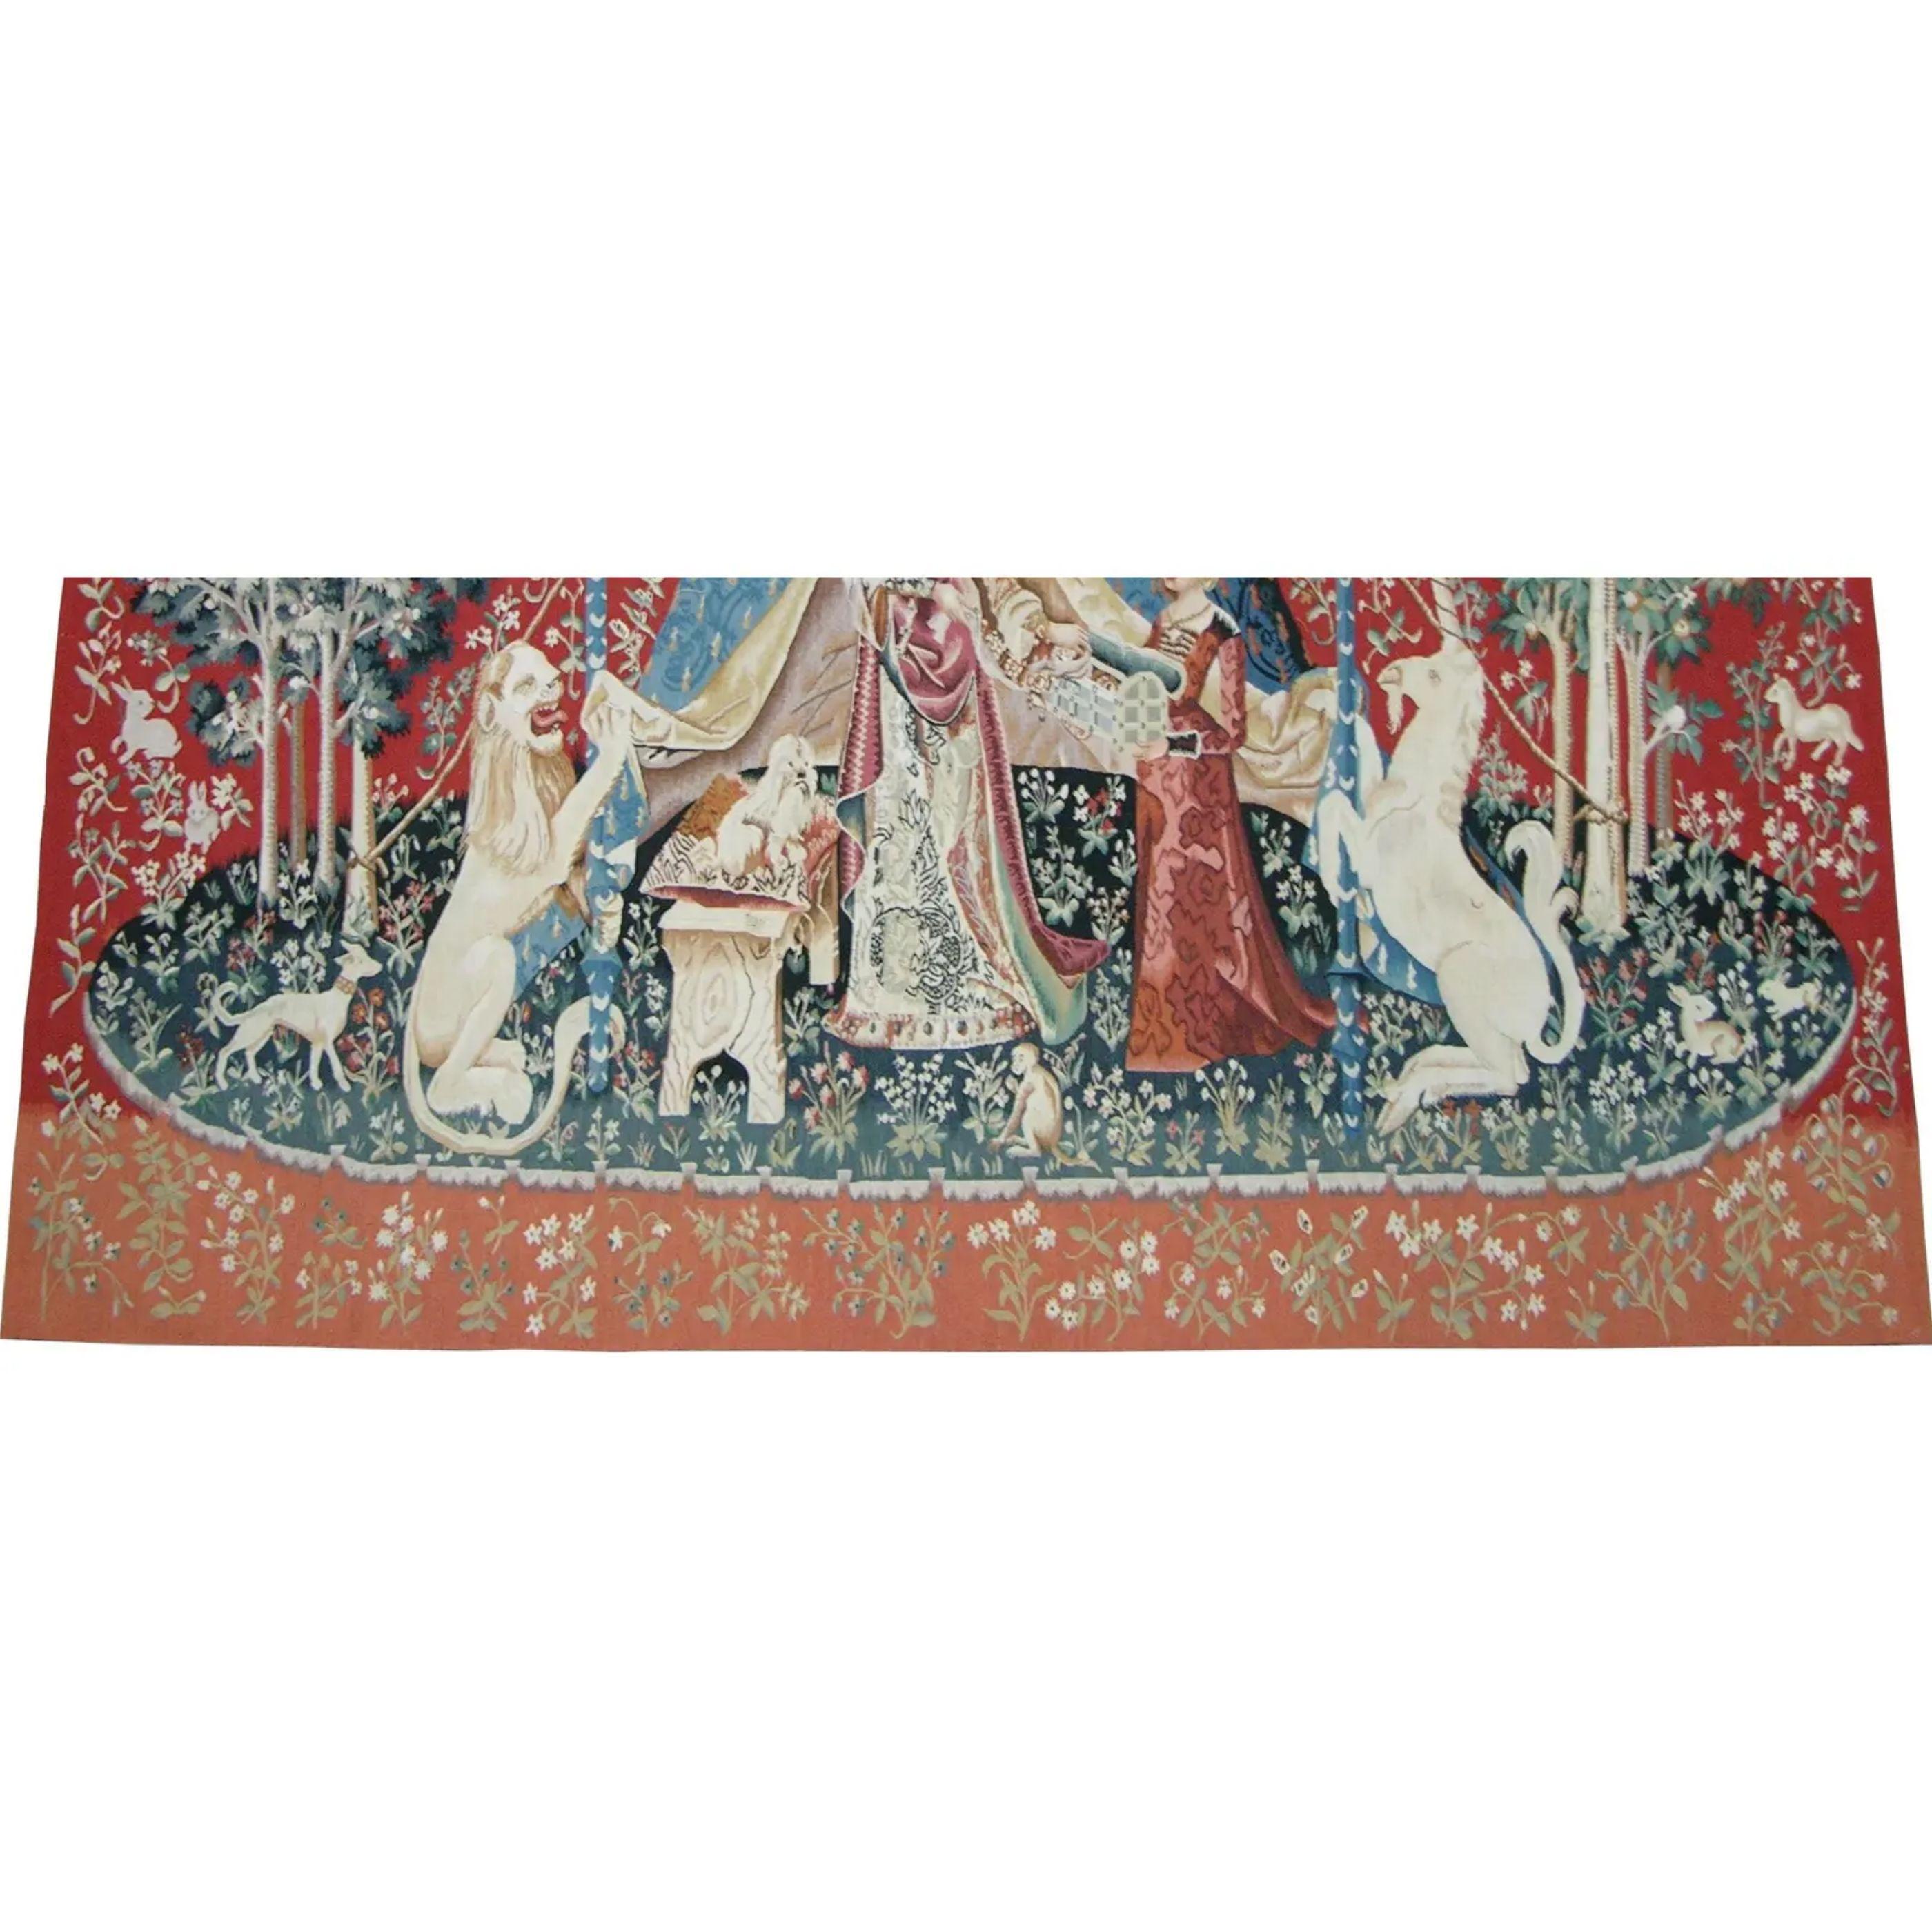 Unknown Vintage Tapestry Depicting Royalty and Majestic Animals 6.3X6.1 For Sale